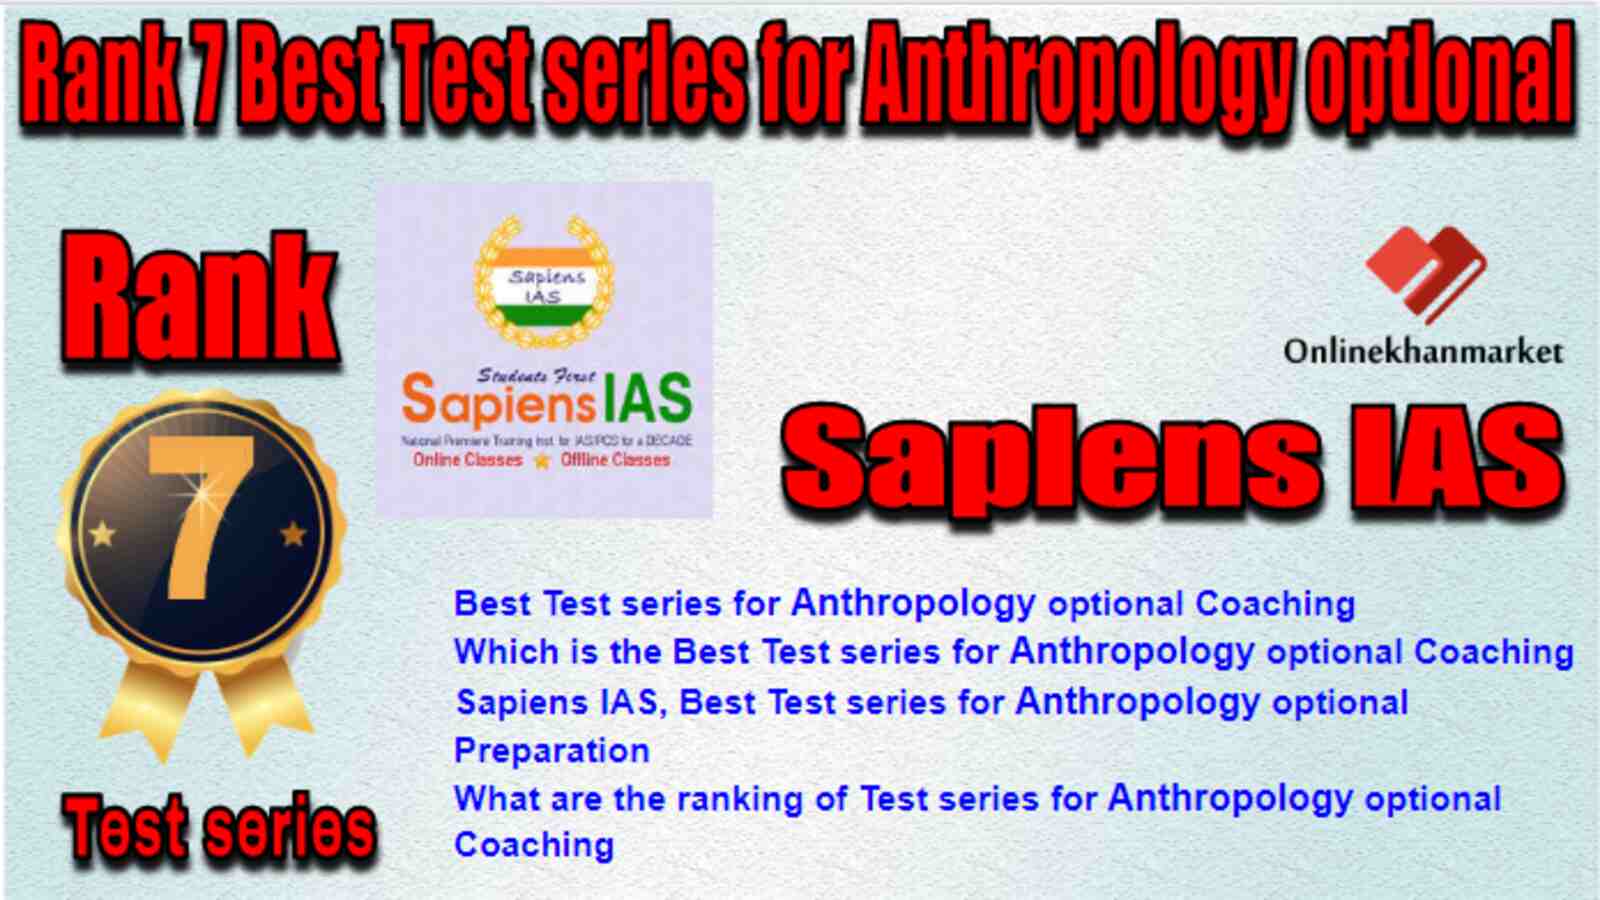 Rank 7 Best Test series for Anthropology optional